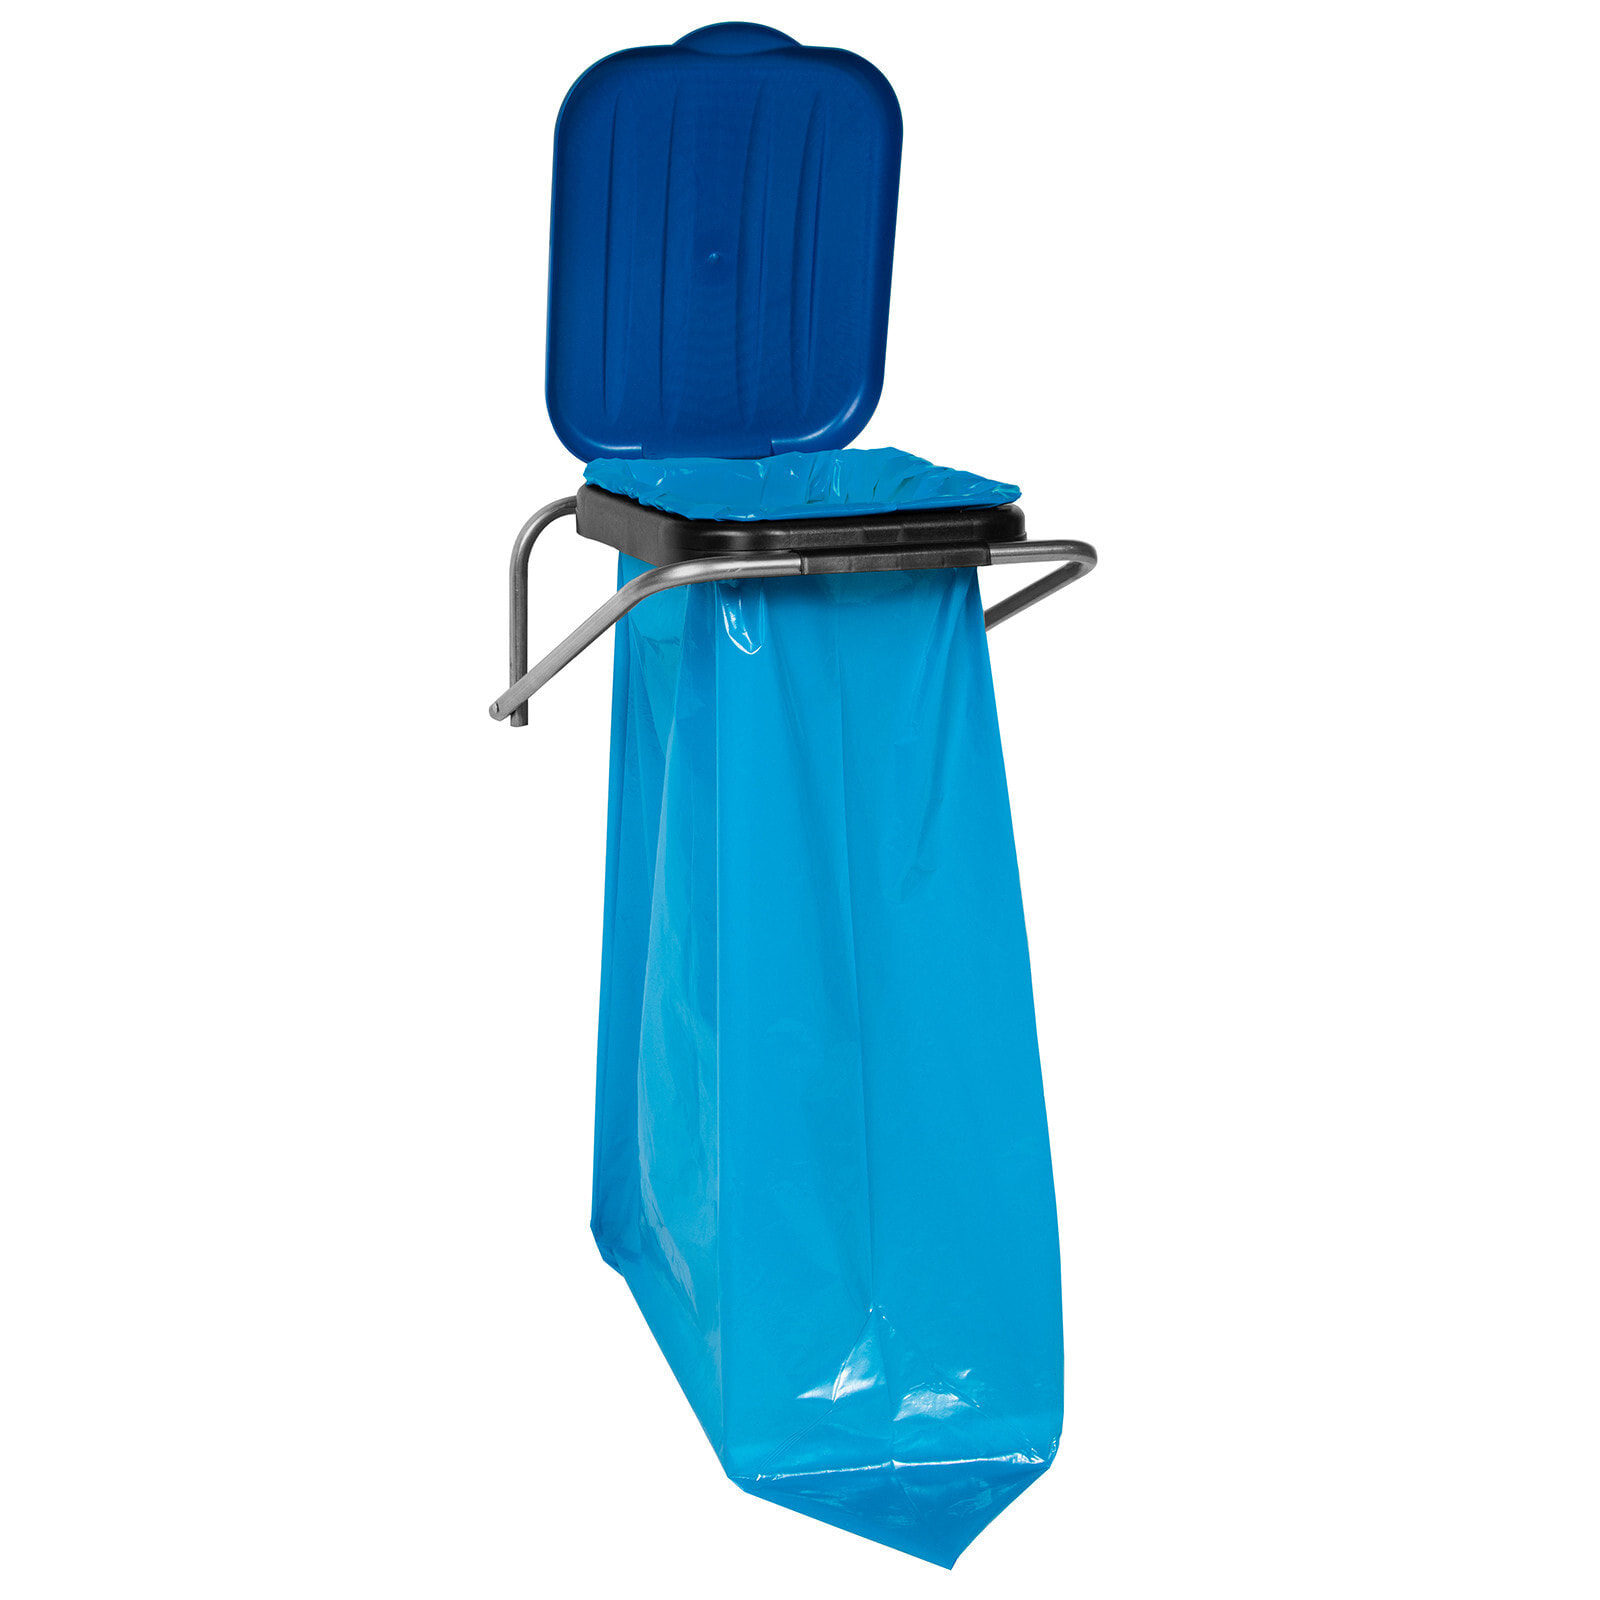 Blue wall mounted holder for segregating rubbish - 120L bags